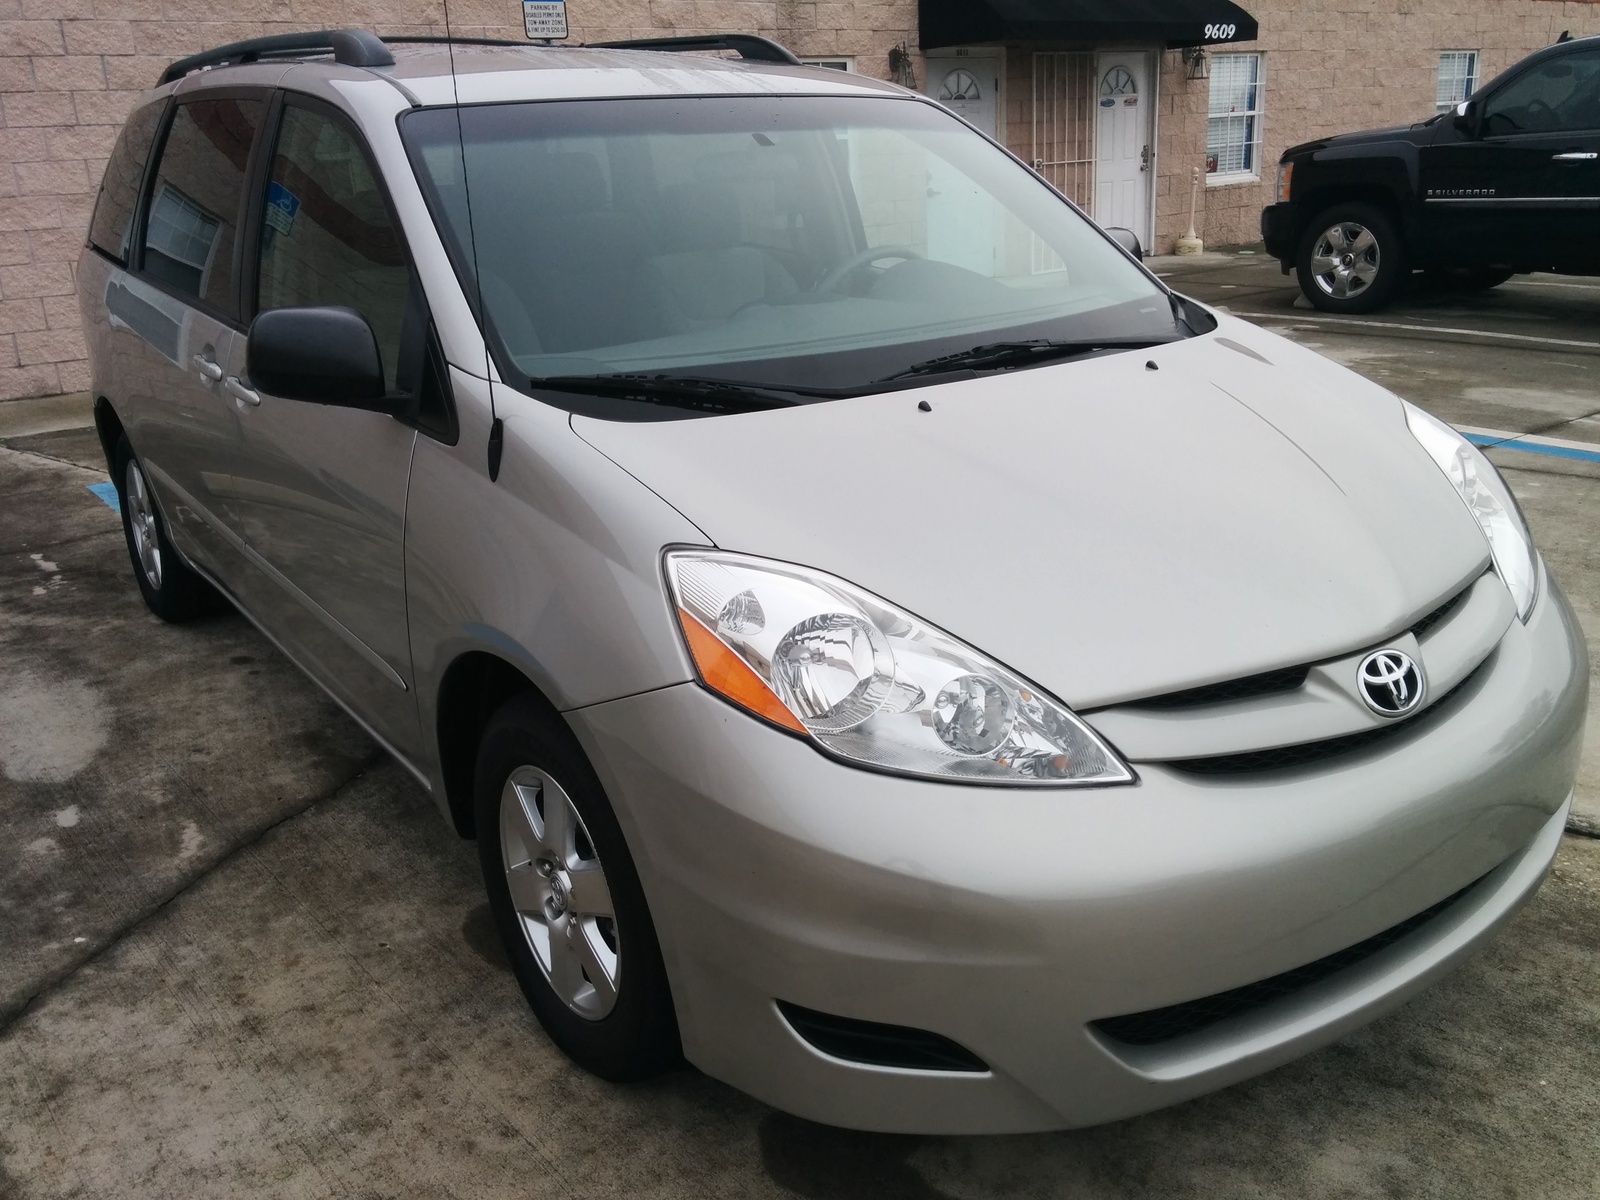 2008 toyota sienna option packages #2